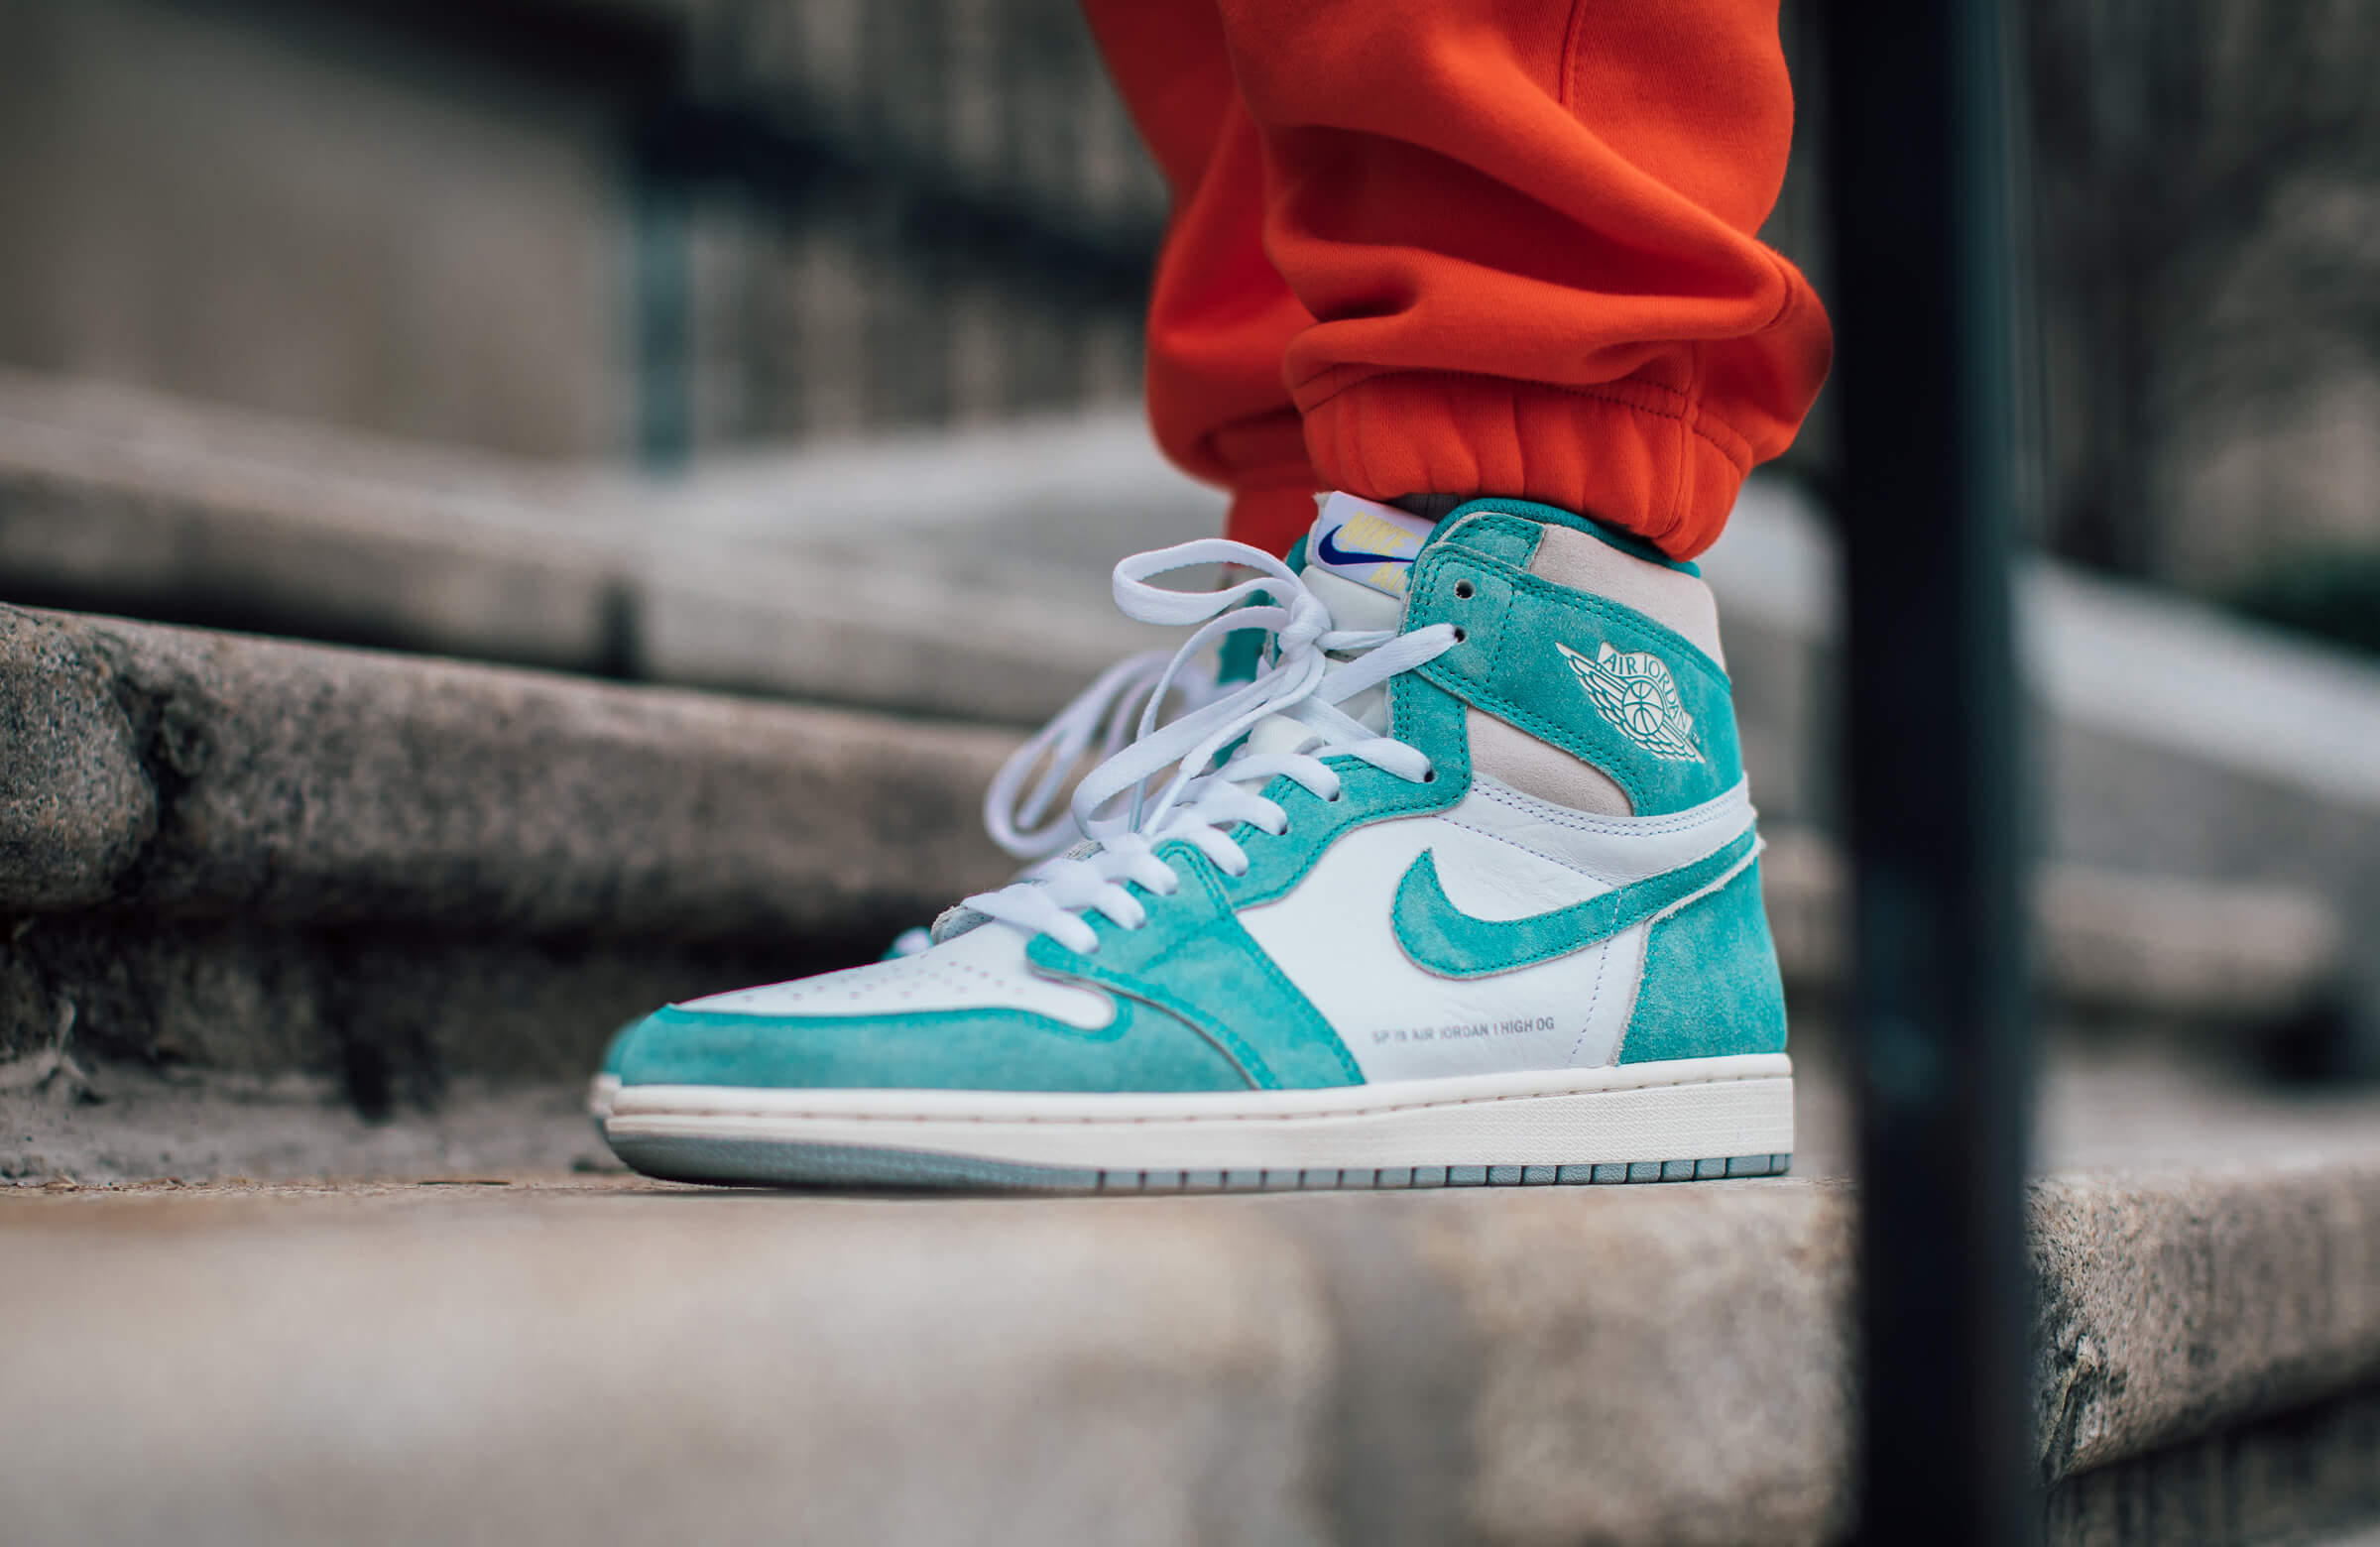 air force turbo green